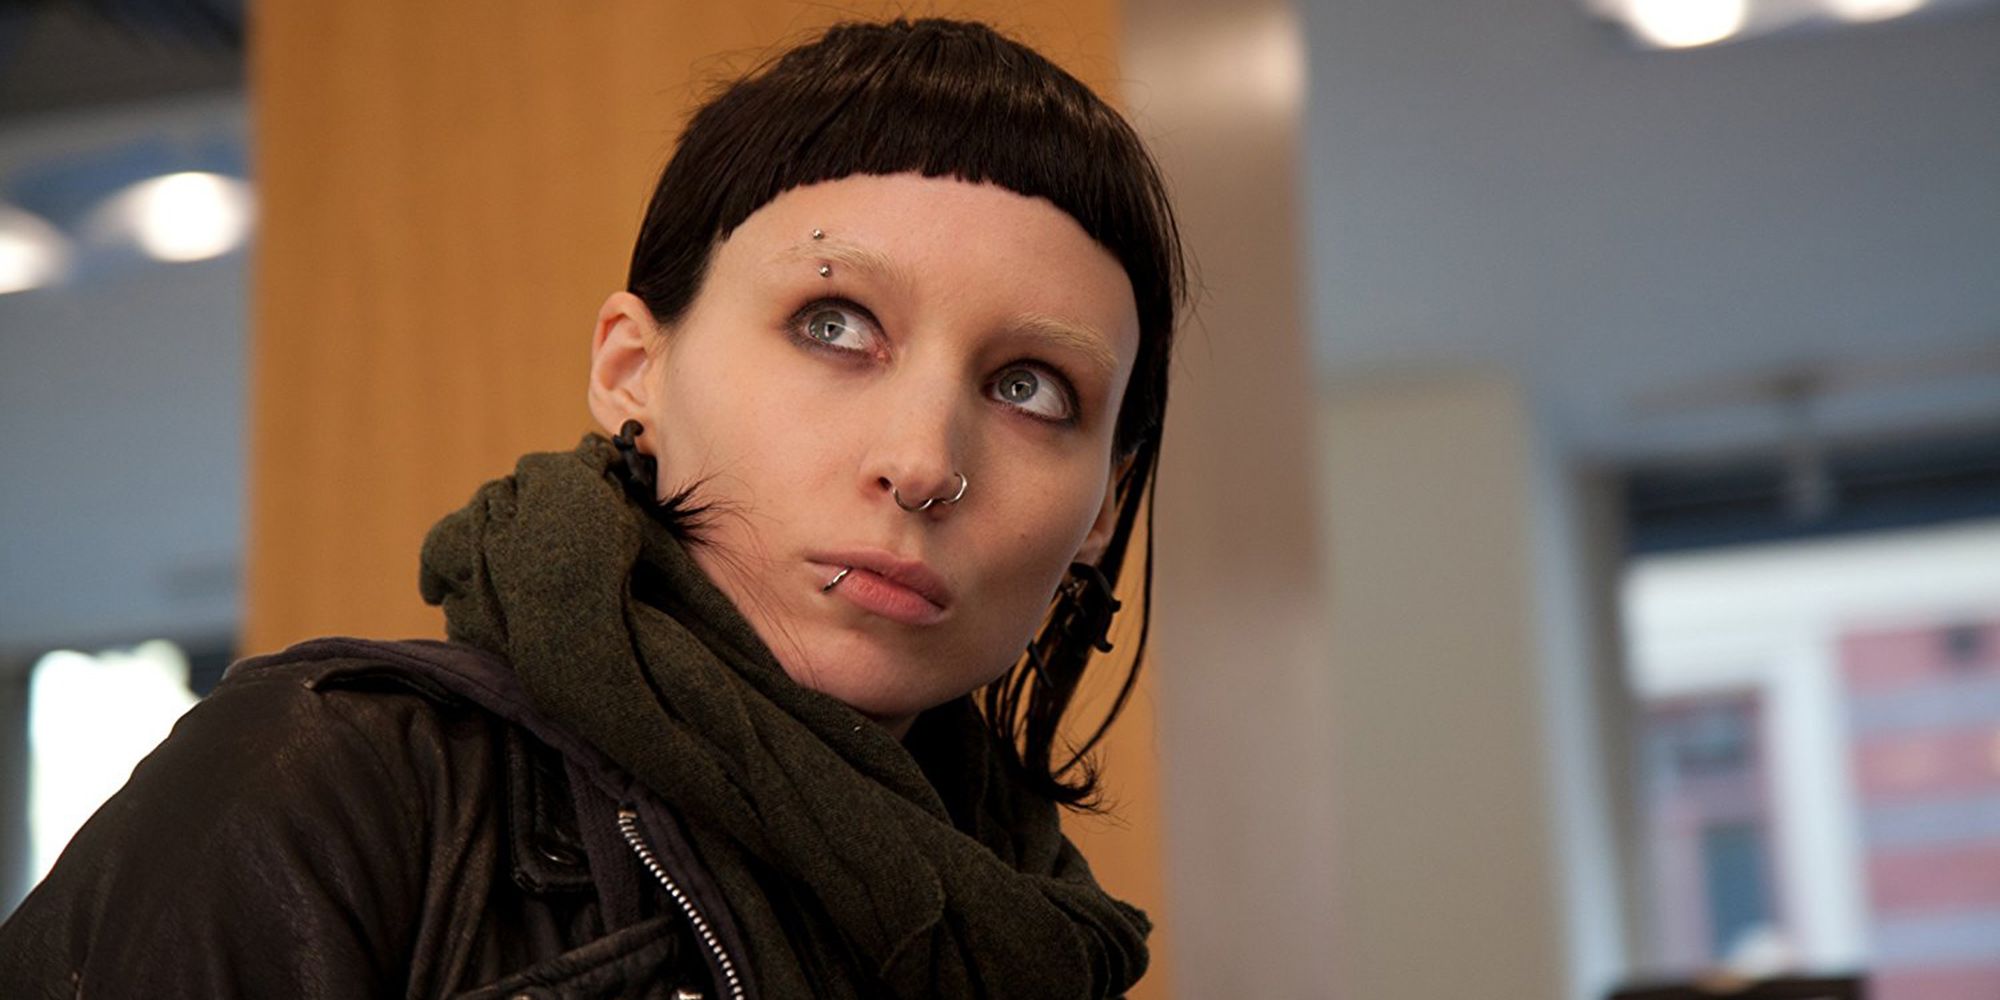 Lisbeth Salander in The Girl with the Dragon Tattoo